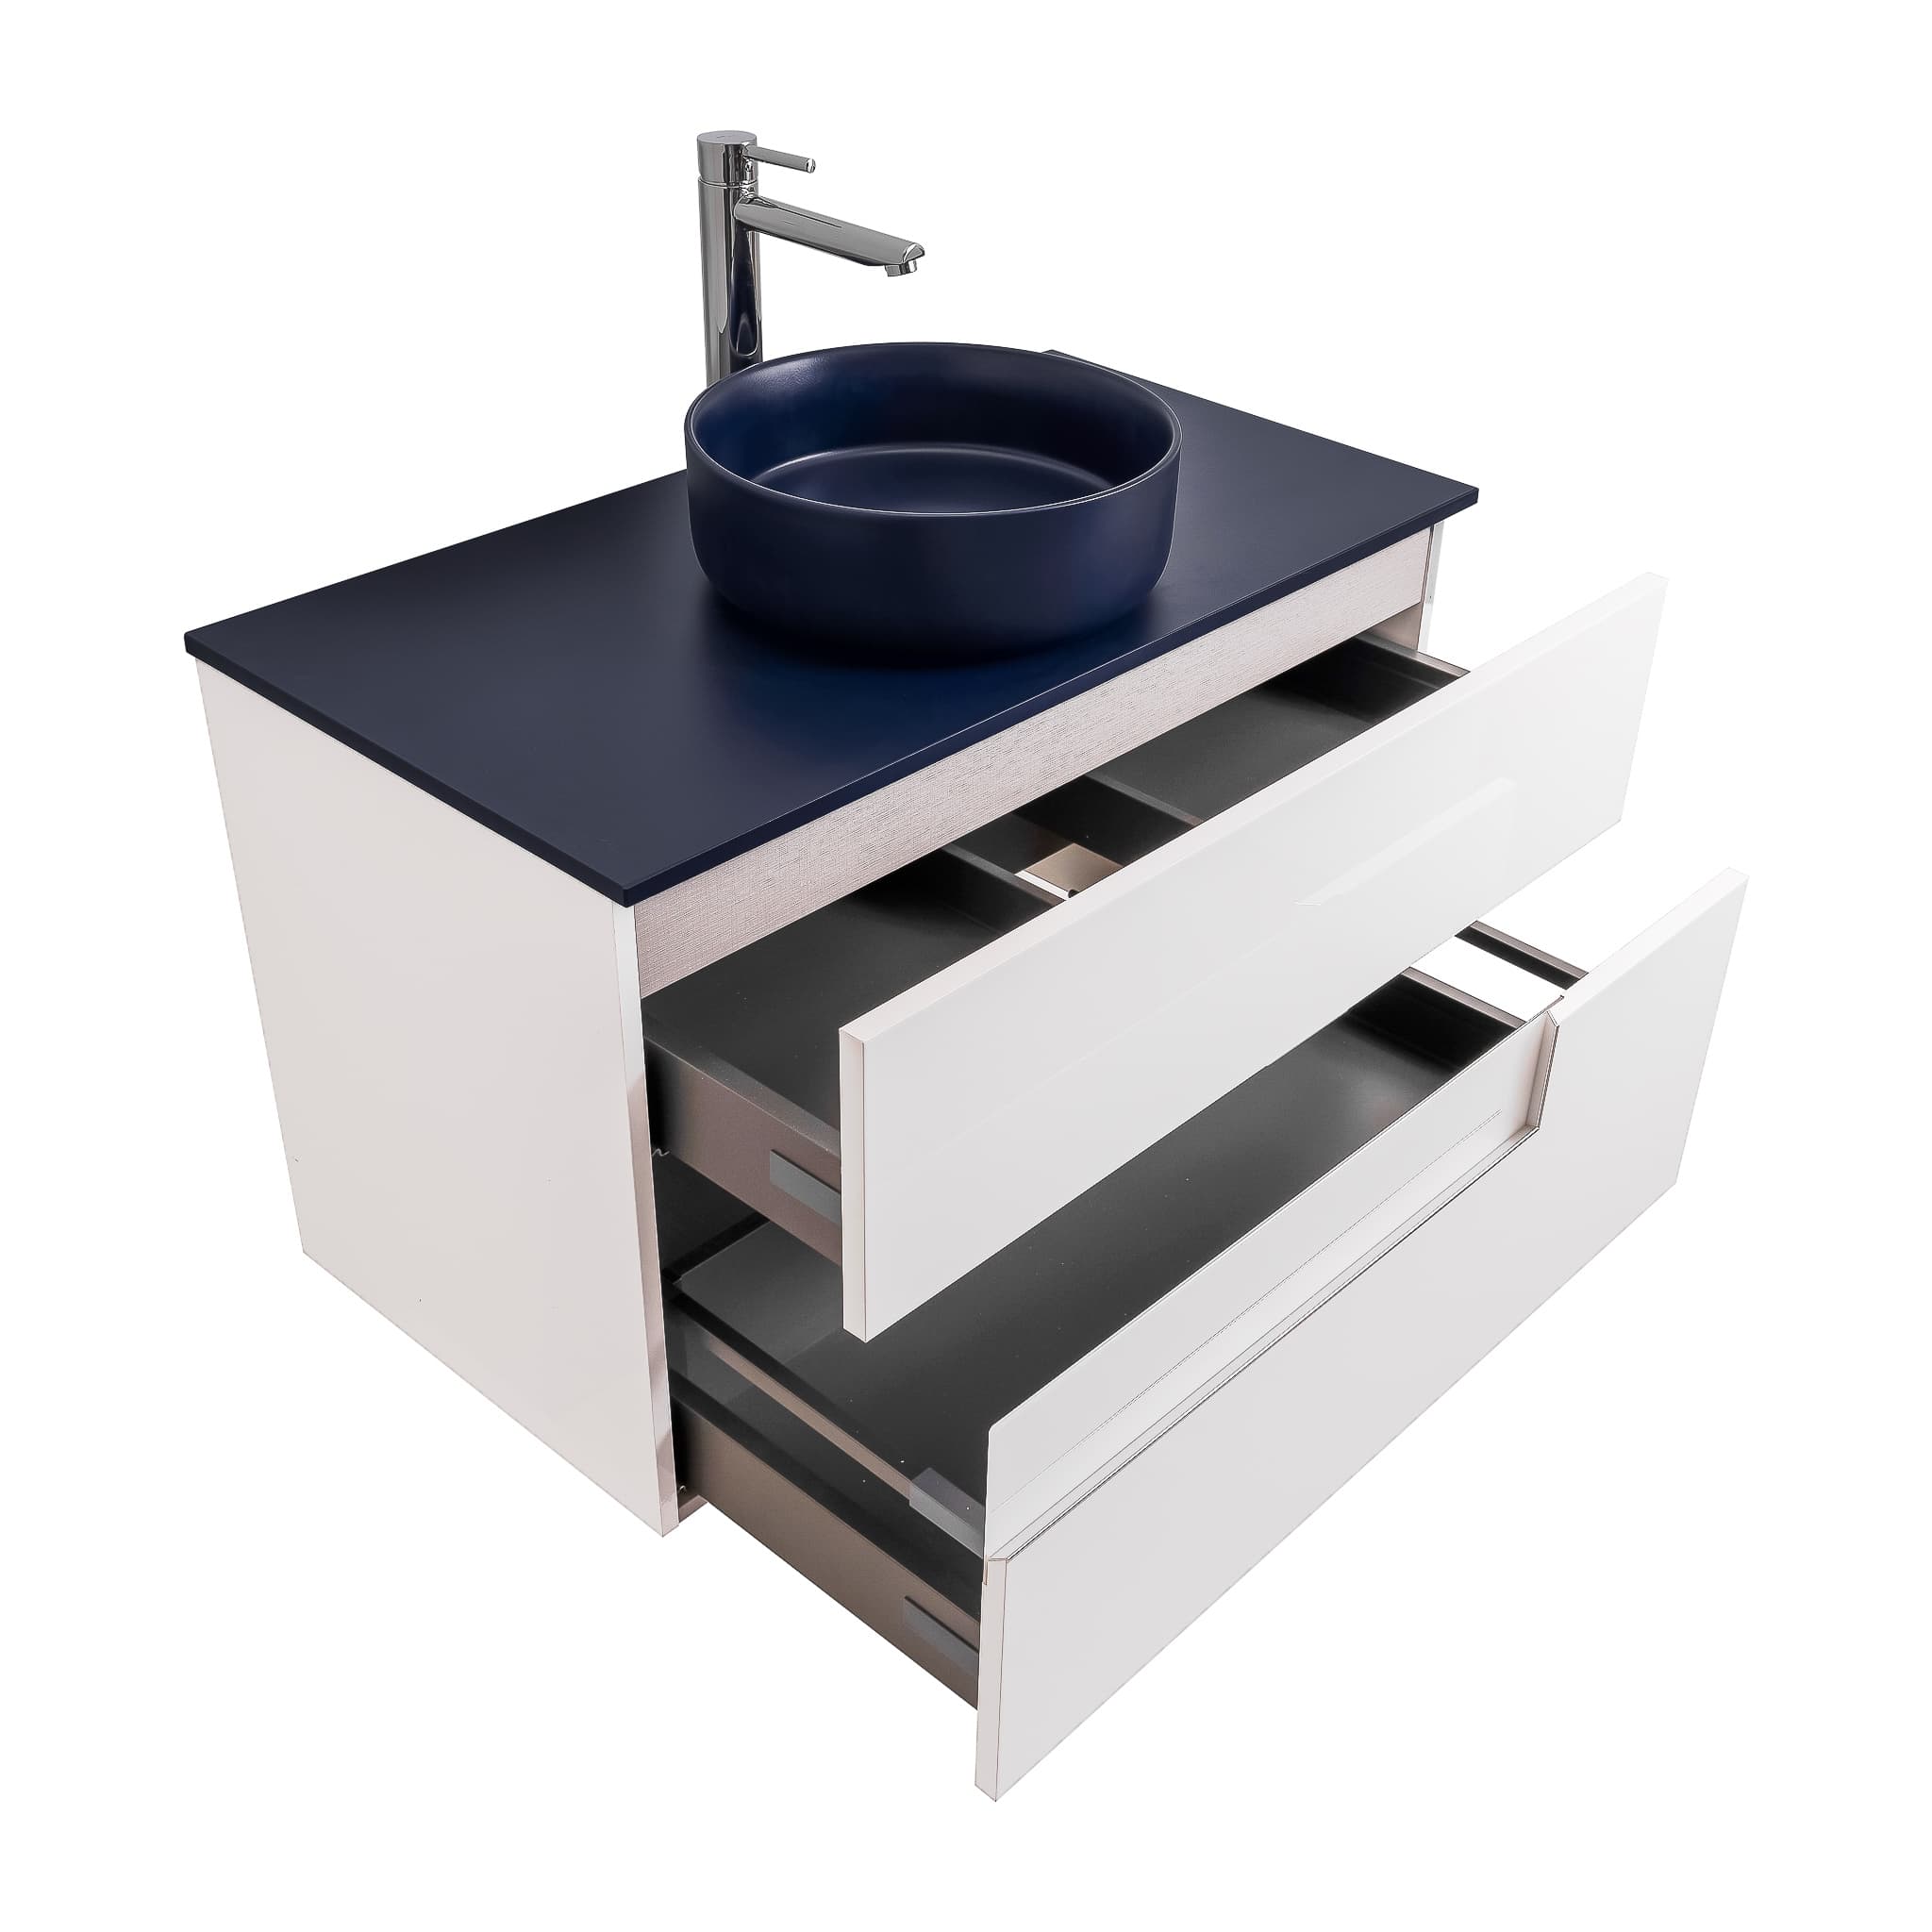 Vision 35.5 White High Gloss Cabinet, Ares Navy Blue Top And Ares Navy Blue Ceramic Basin, Wall Mounted Modern Vanity Set